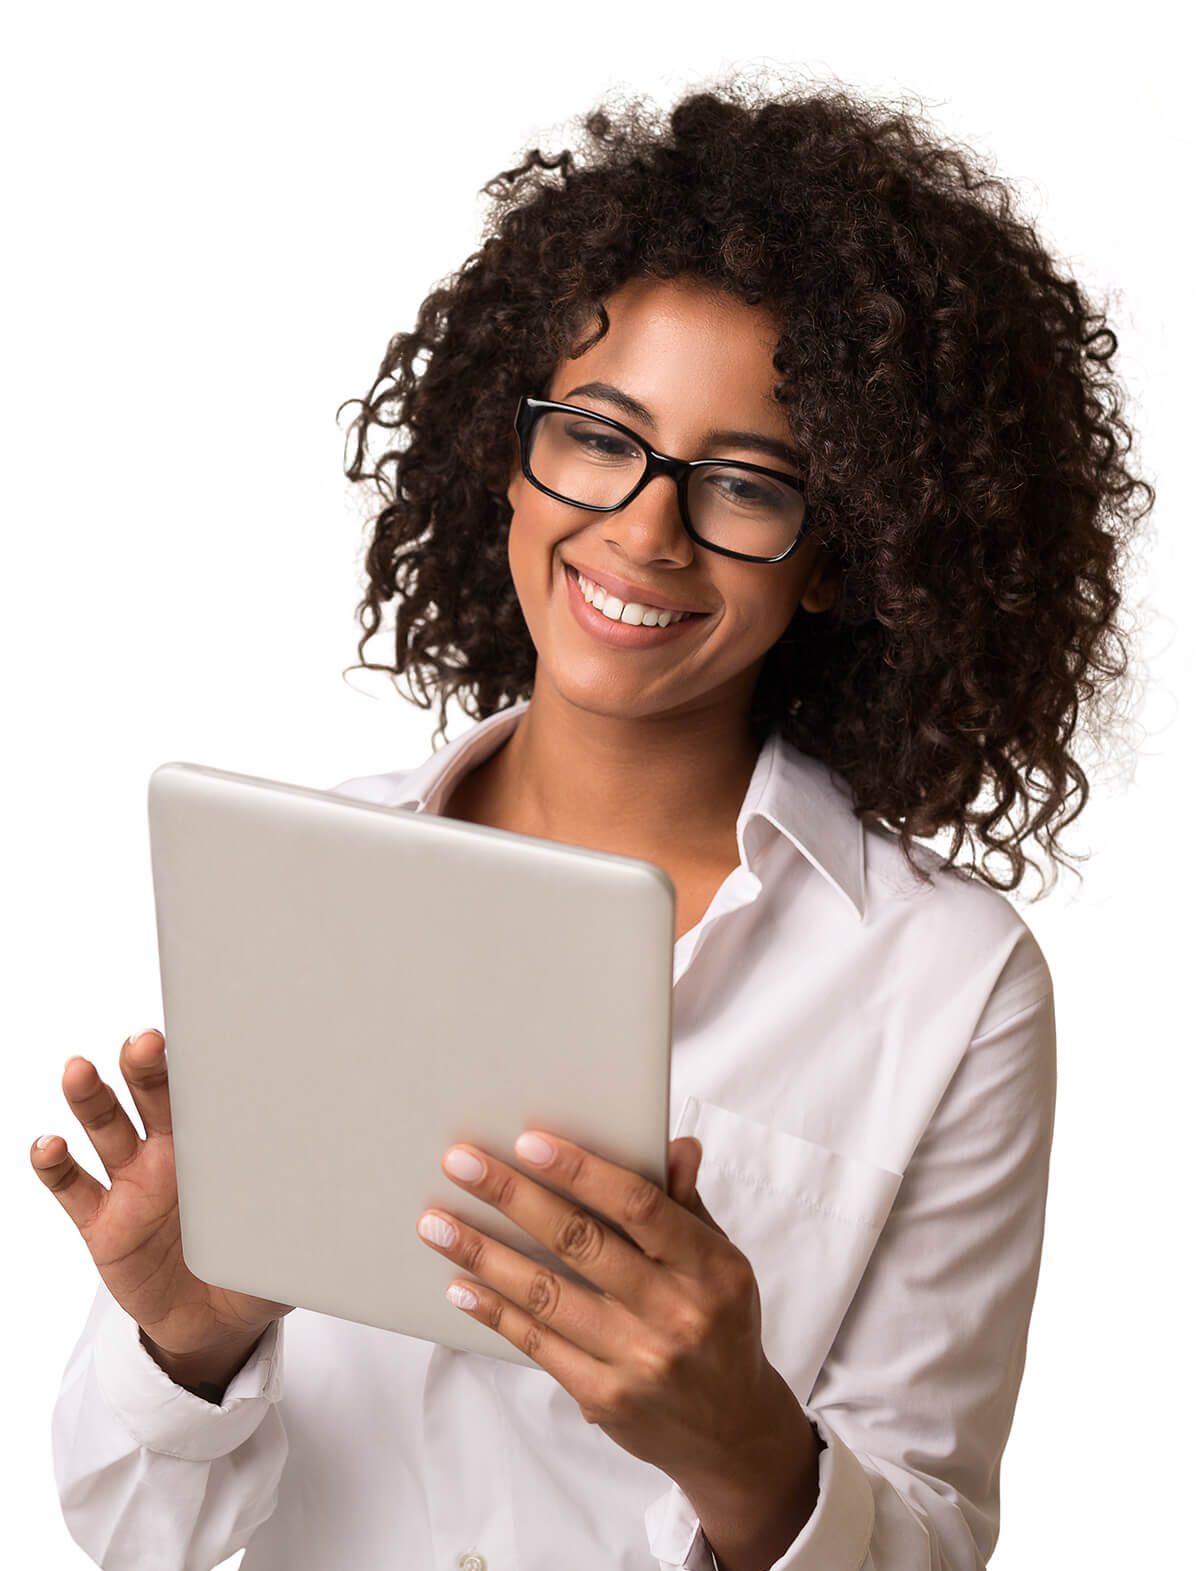 Smiling young woman on tablet with replacement blue protect lenses